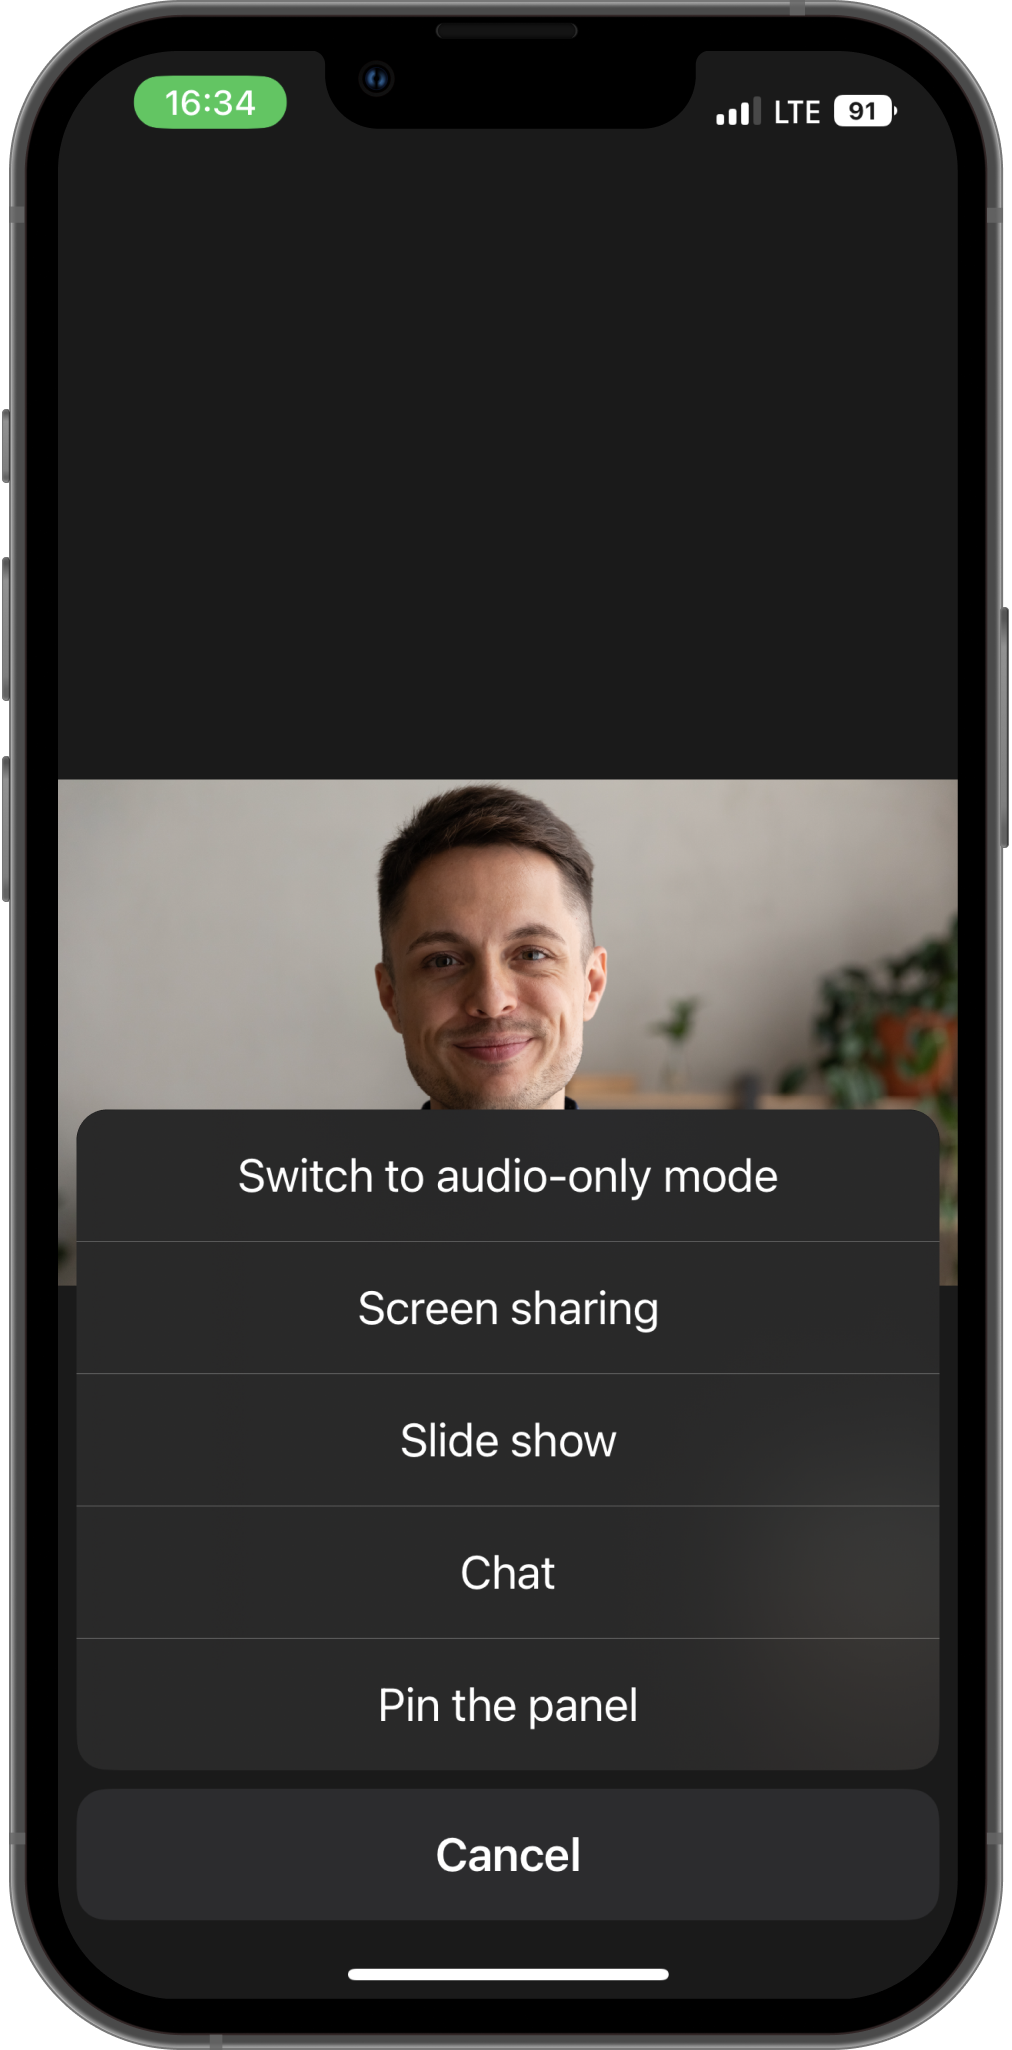 TrueConf 3.4 for iOS: File sharing and audio-only mode 15